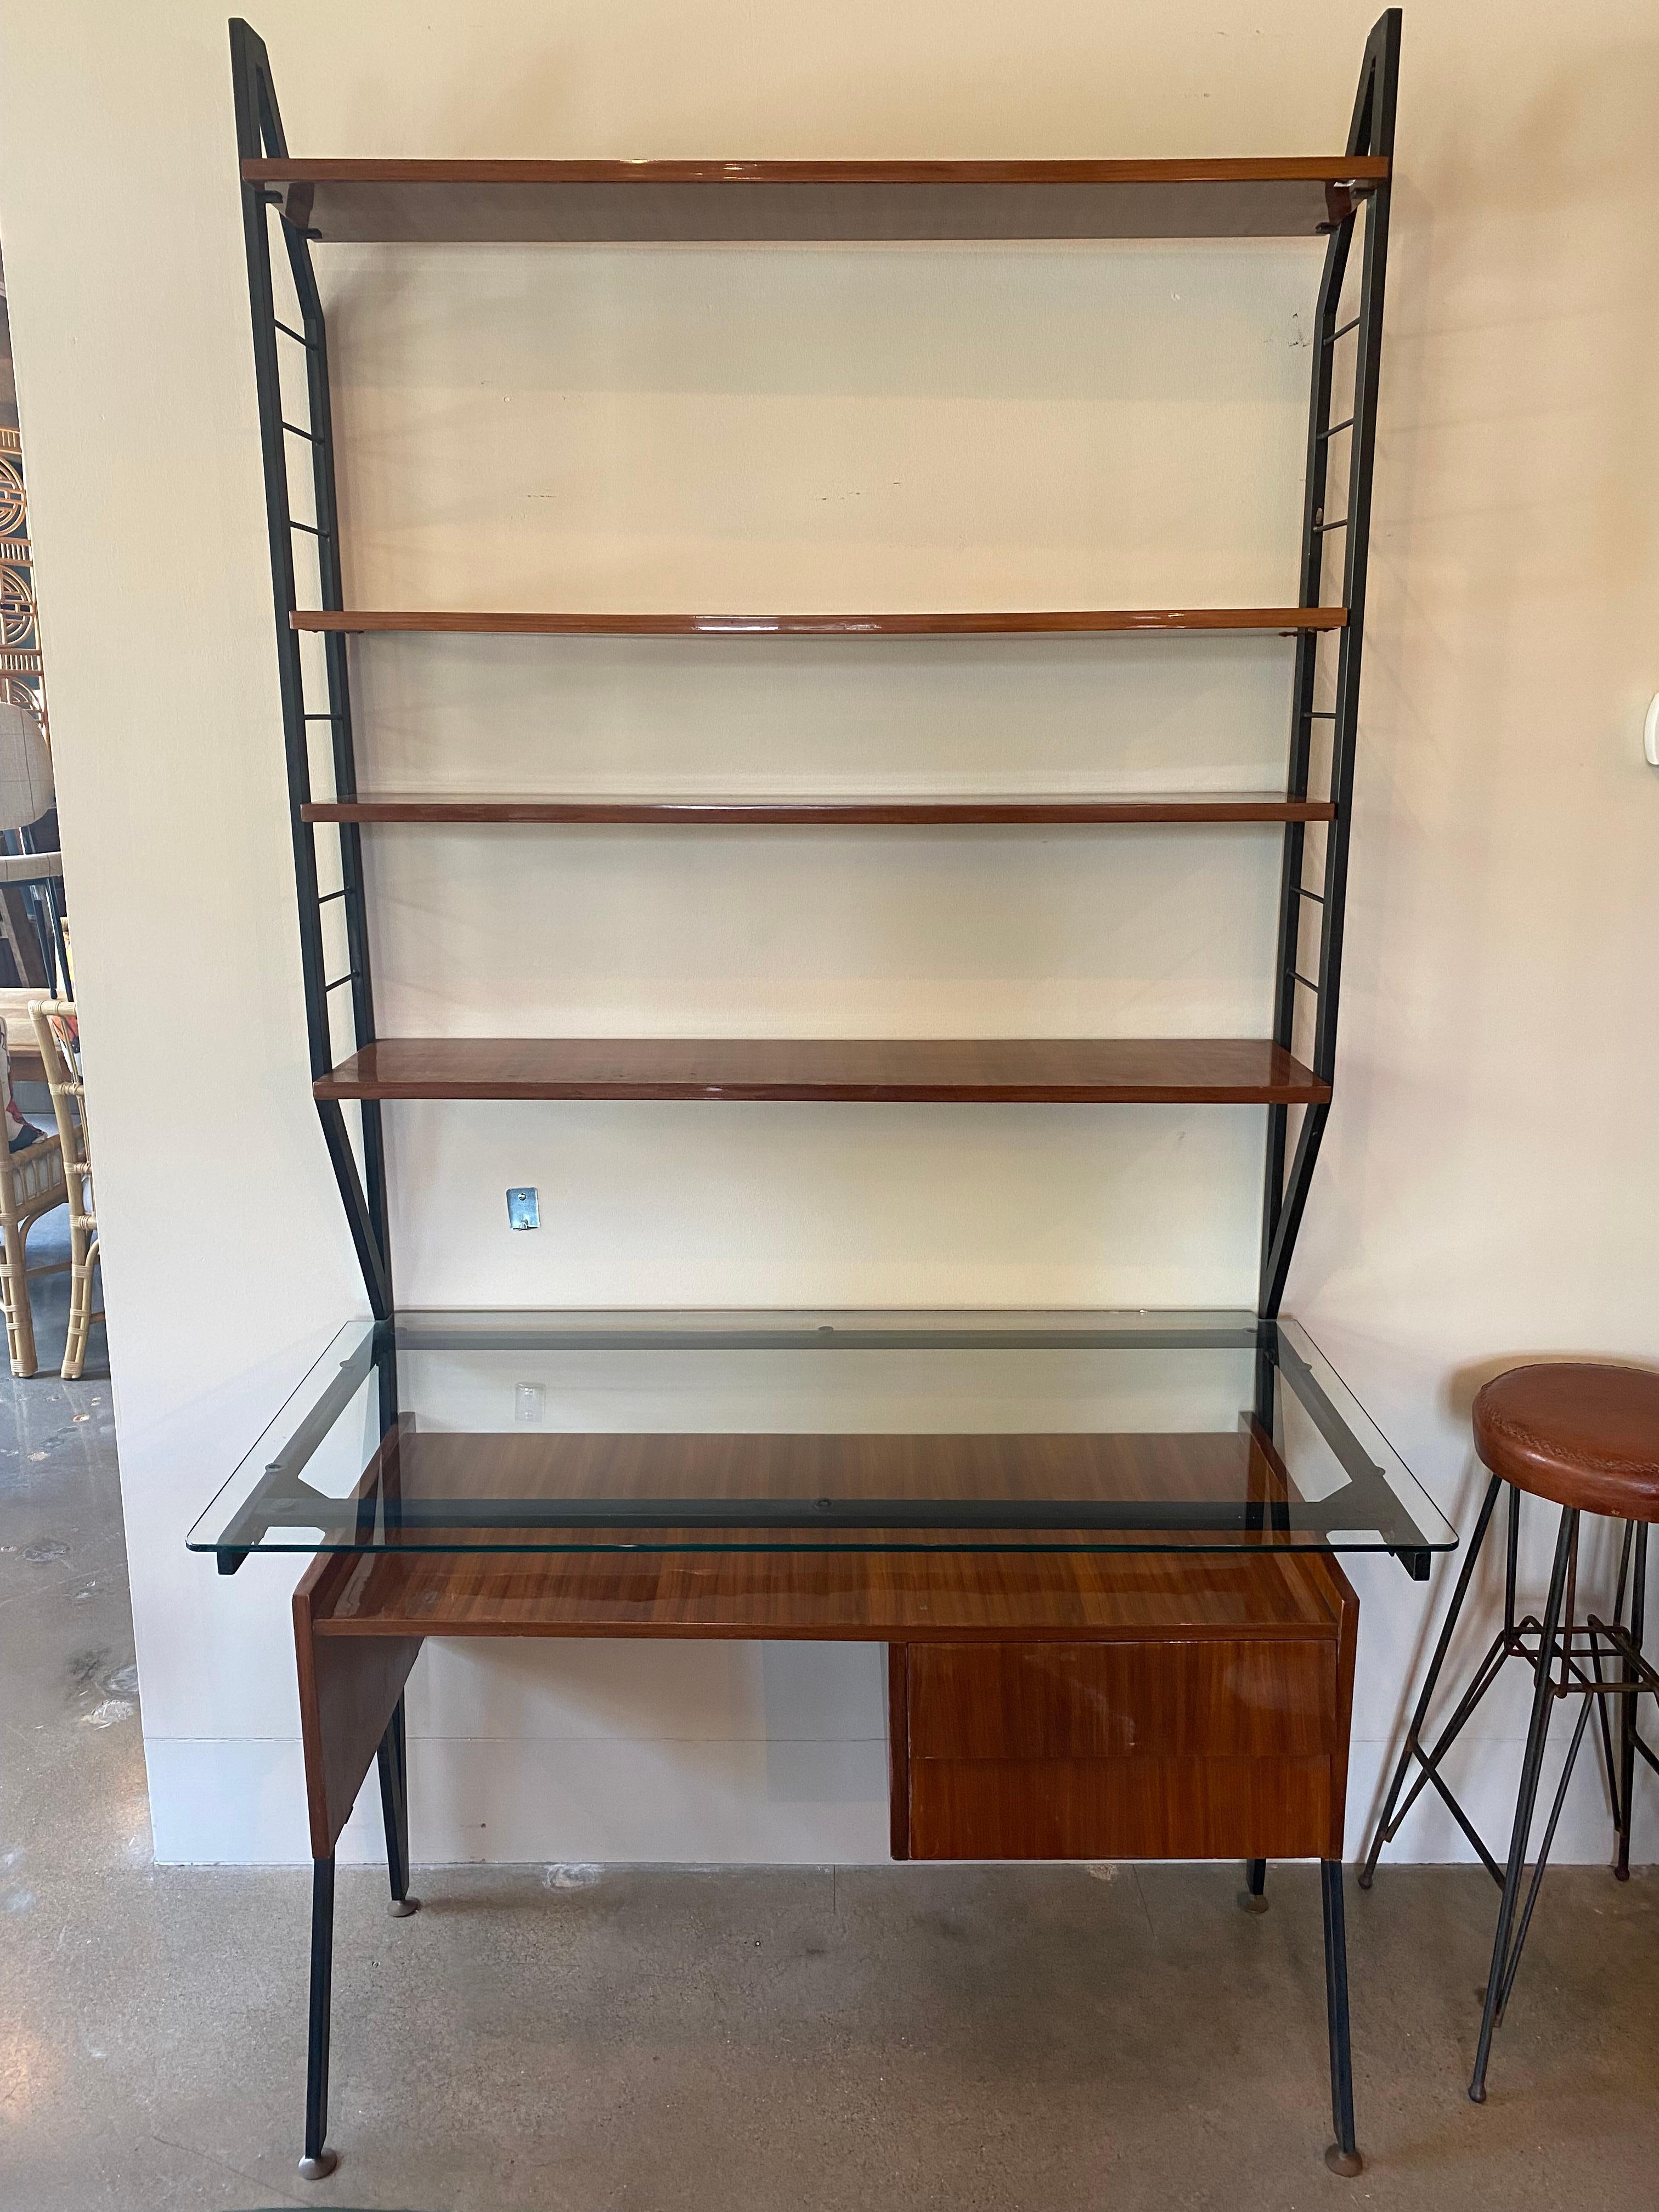 Italian Mid-Century Modern Desk with Shelves, Style of Ico Parisi For Sale 4